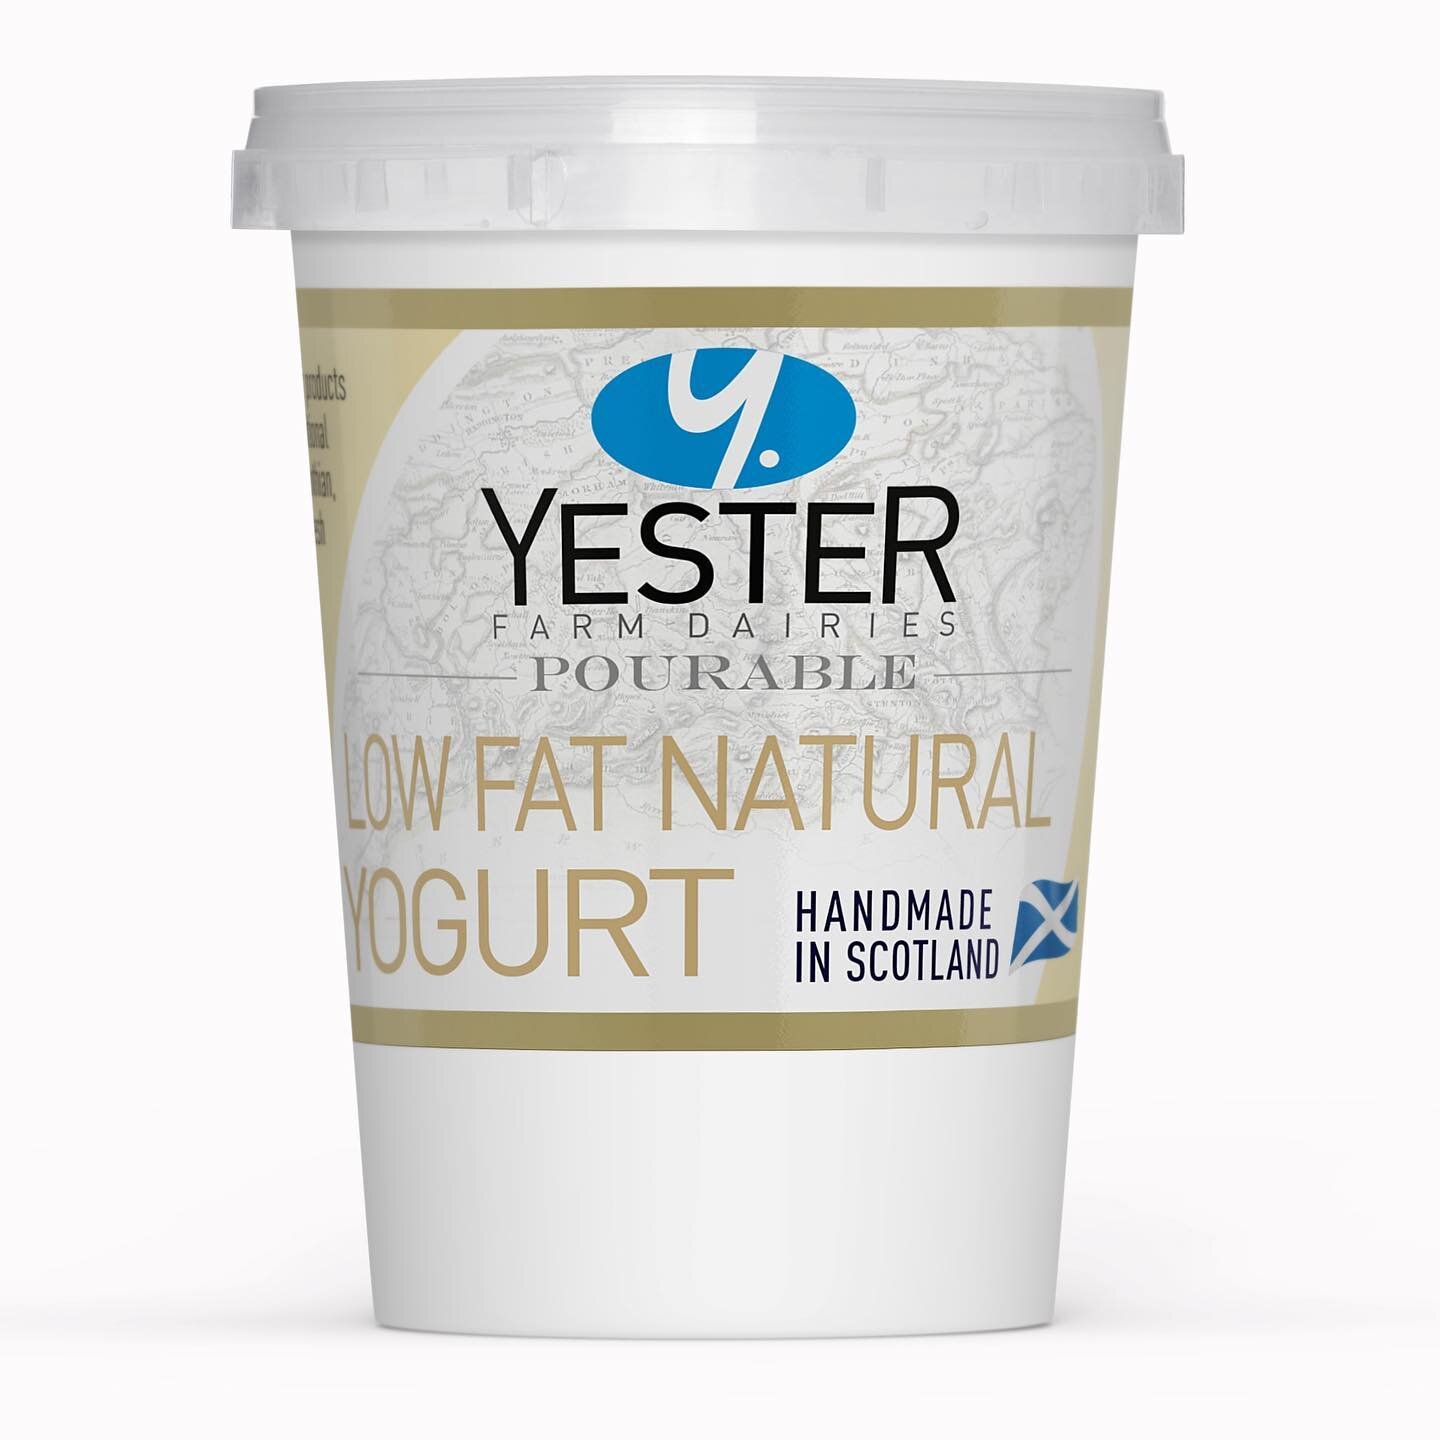 Our Low Fat Natural Yoghurt has no added sugar and tastes just as good as the Whole  Milk version.  #nosugar #lowfatyoghurt #healthylifestyle 

Perfect for the  @thebodycoach 90day #leanies. Of course our #greekstyleyoghurt and #wholemilkyoghurt are 